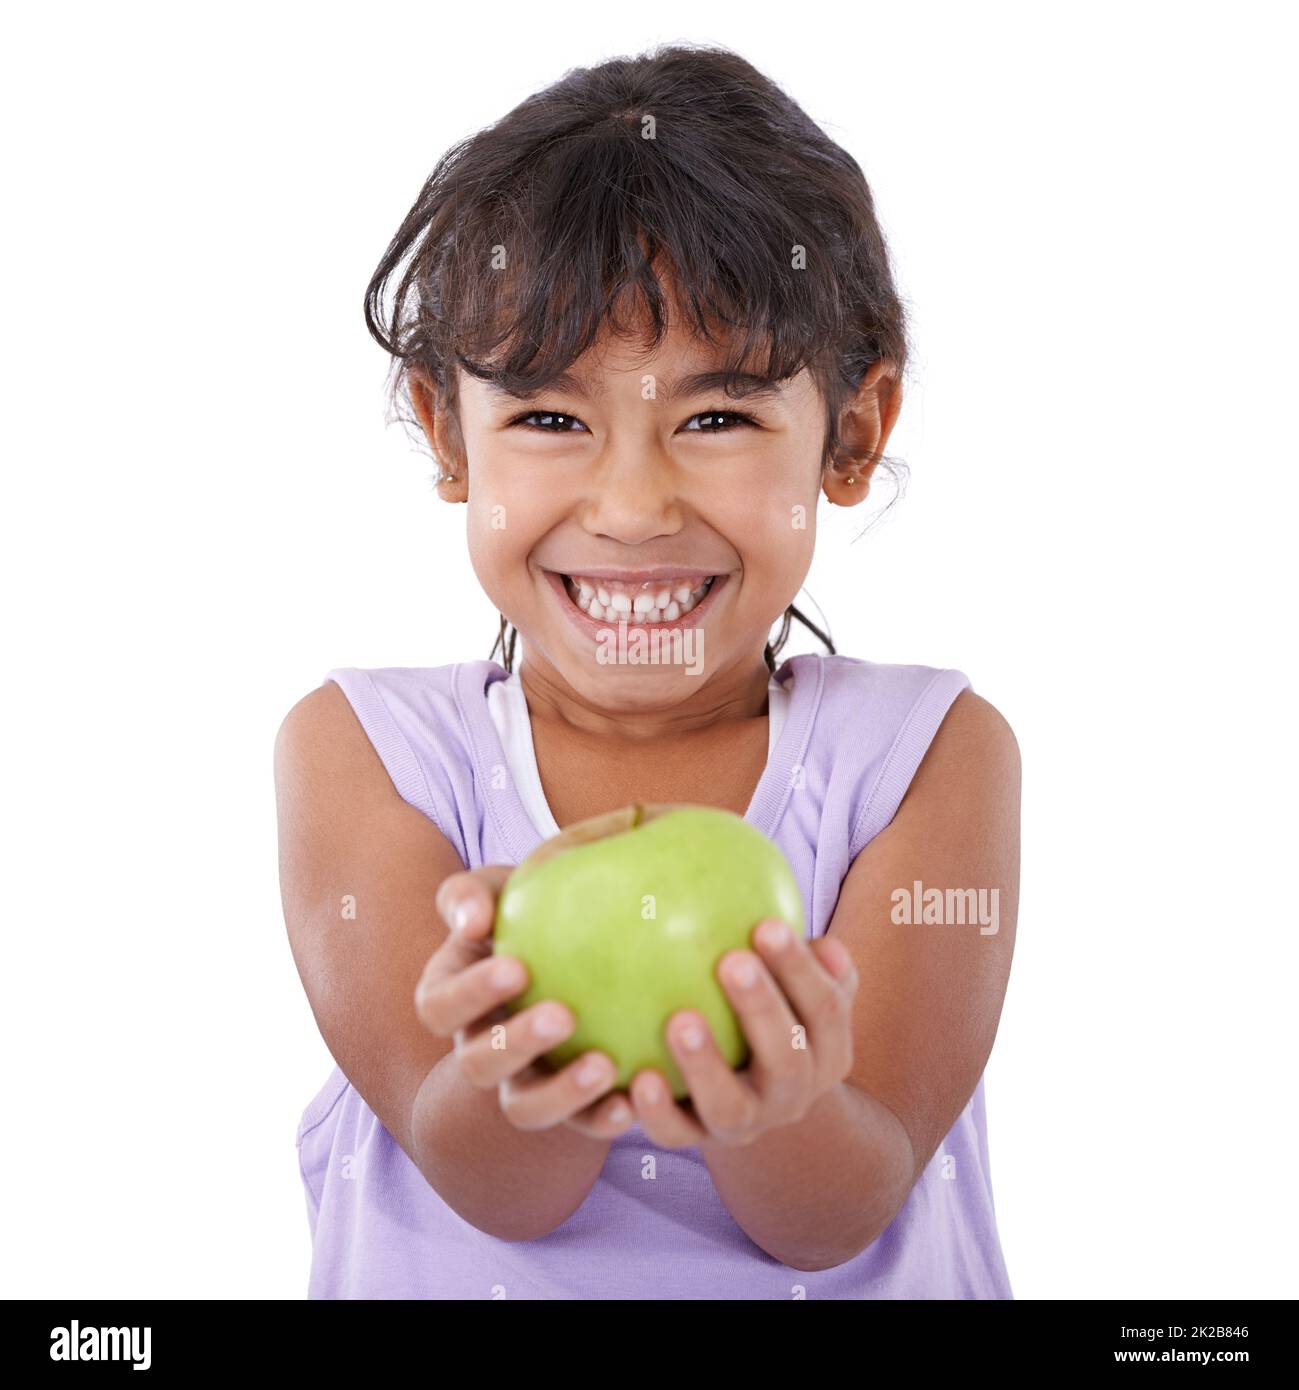 Mom says this will keep me strong and healthy. Portrait of an adorable little girl smiling and holding an apple. Stock Photo